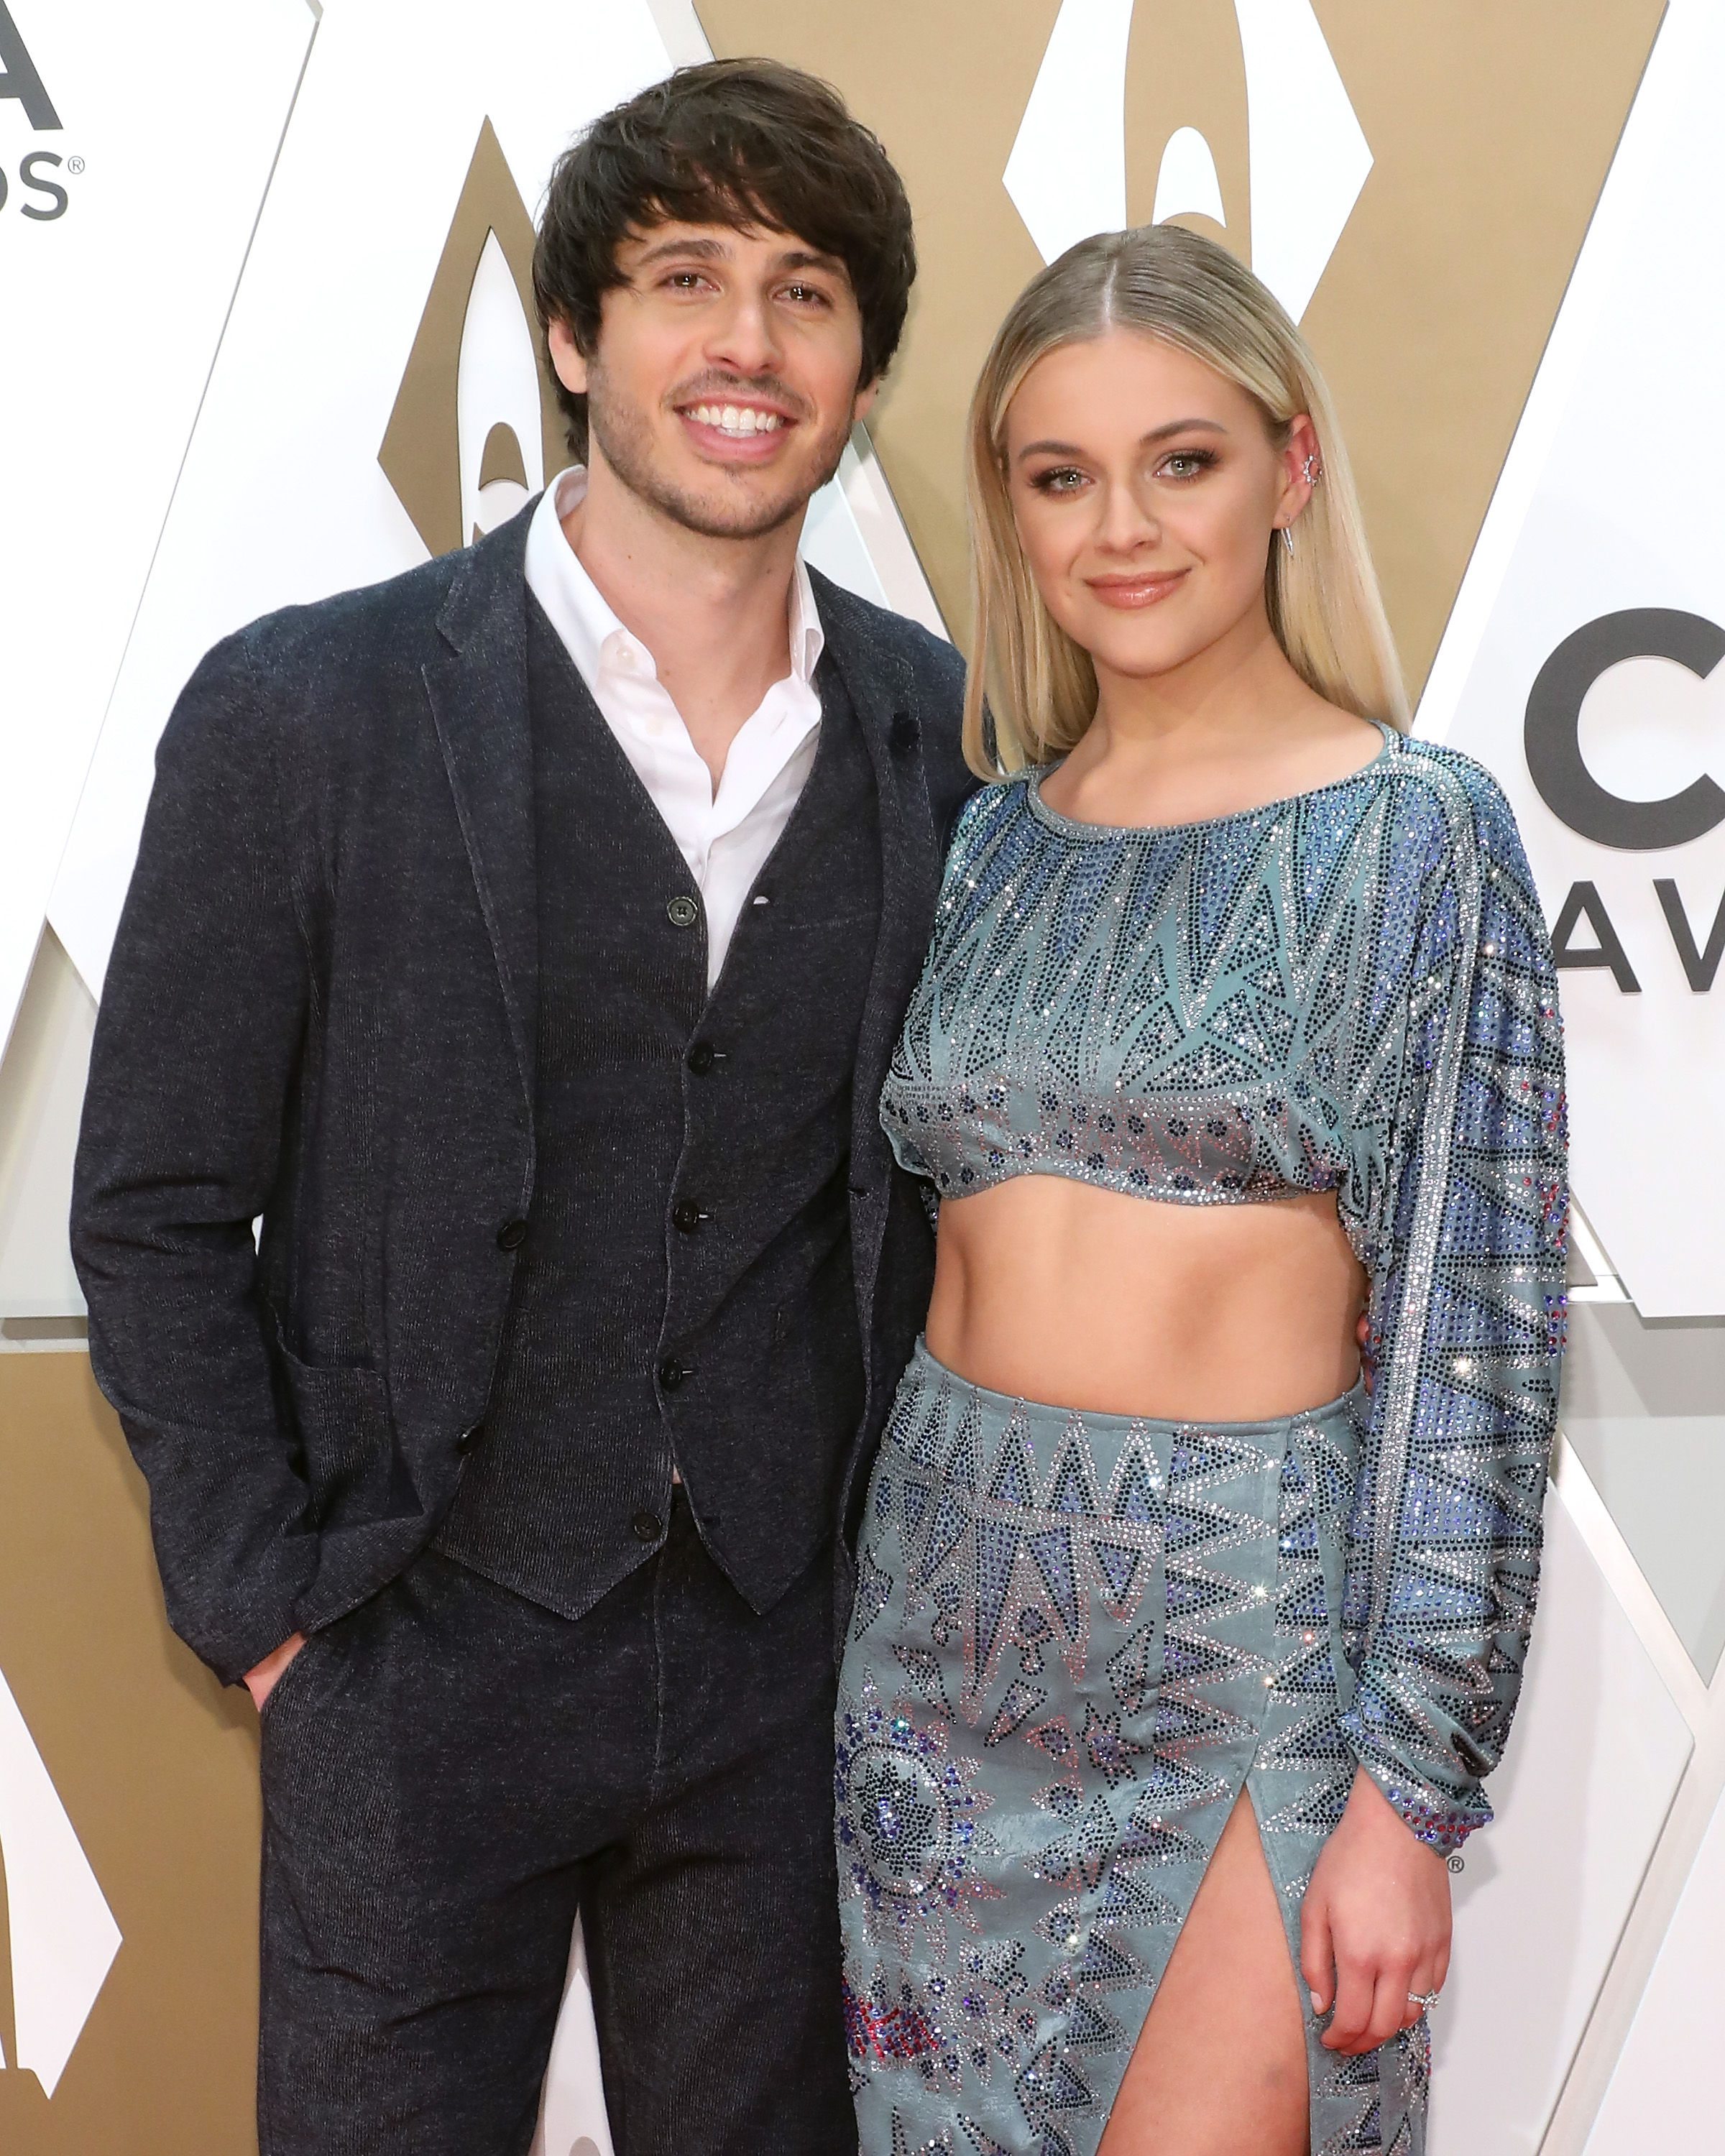 Morgan in a suit and Kelsea in a metallic beaded dress with a cut-out detail